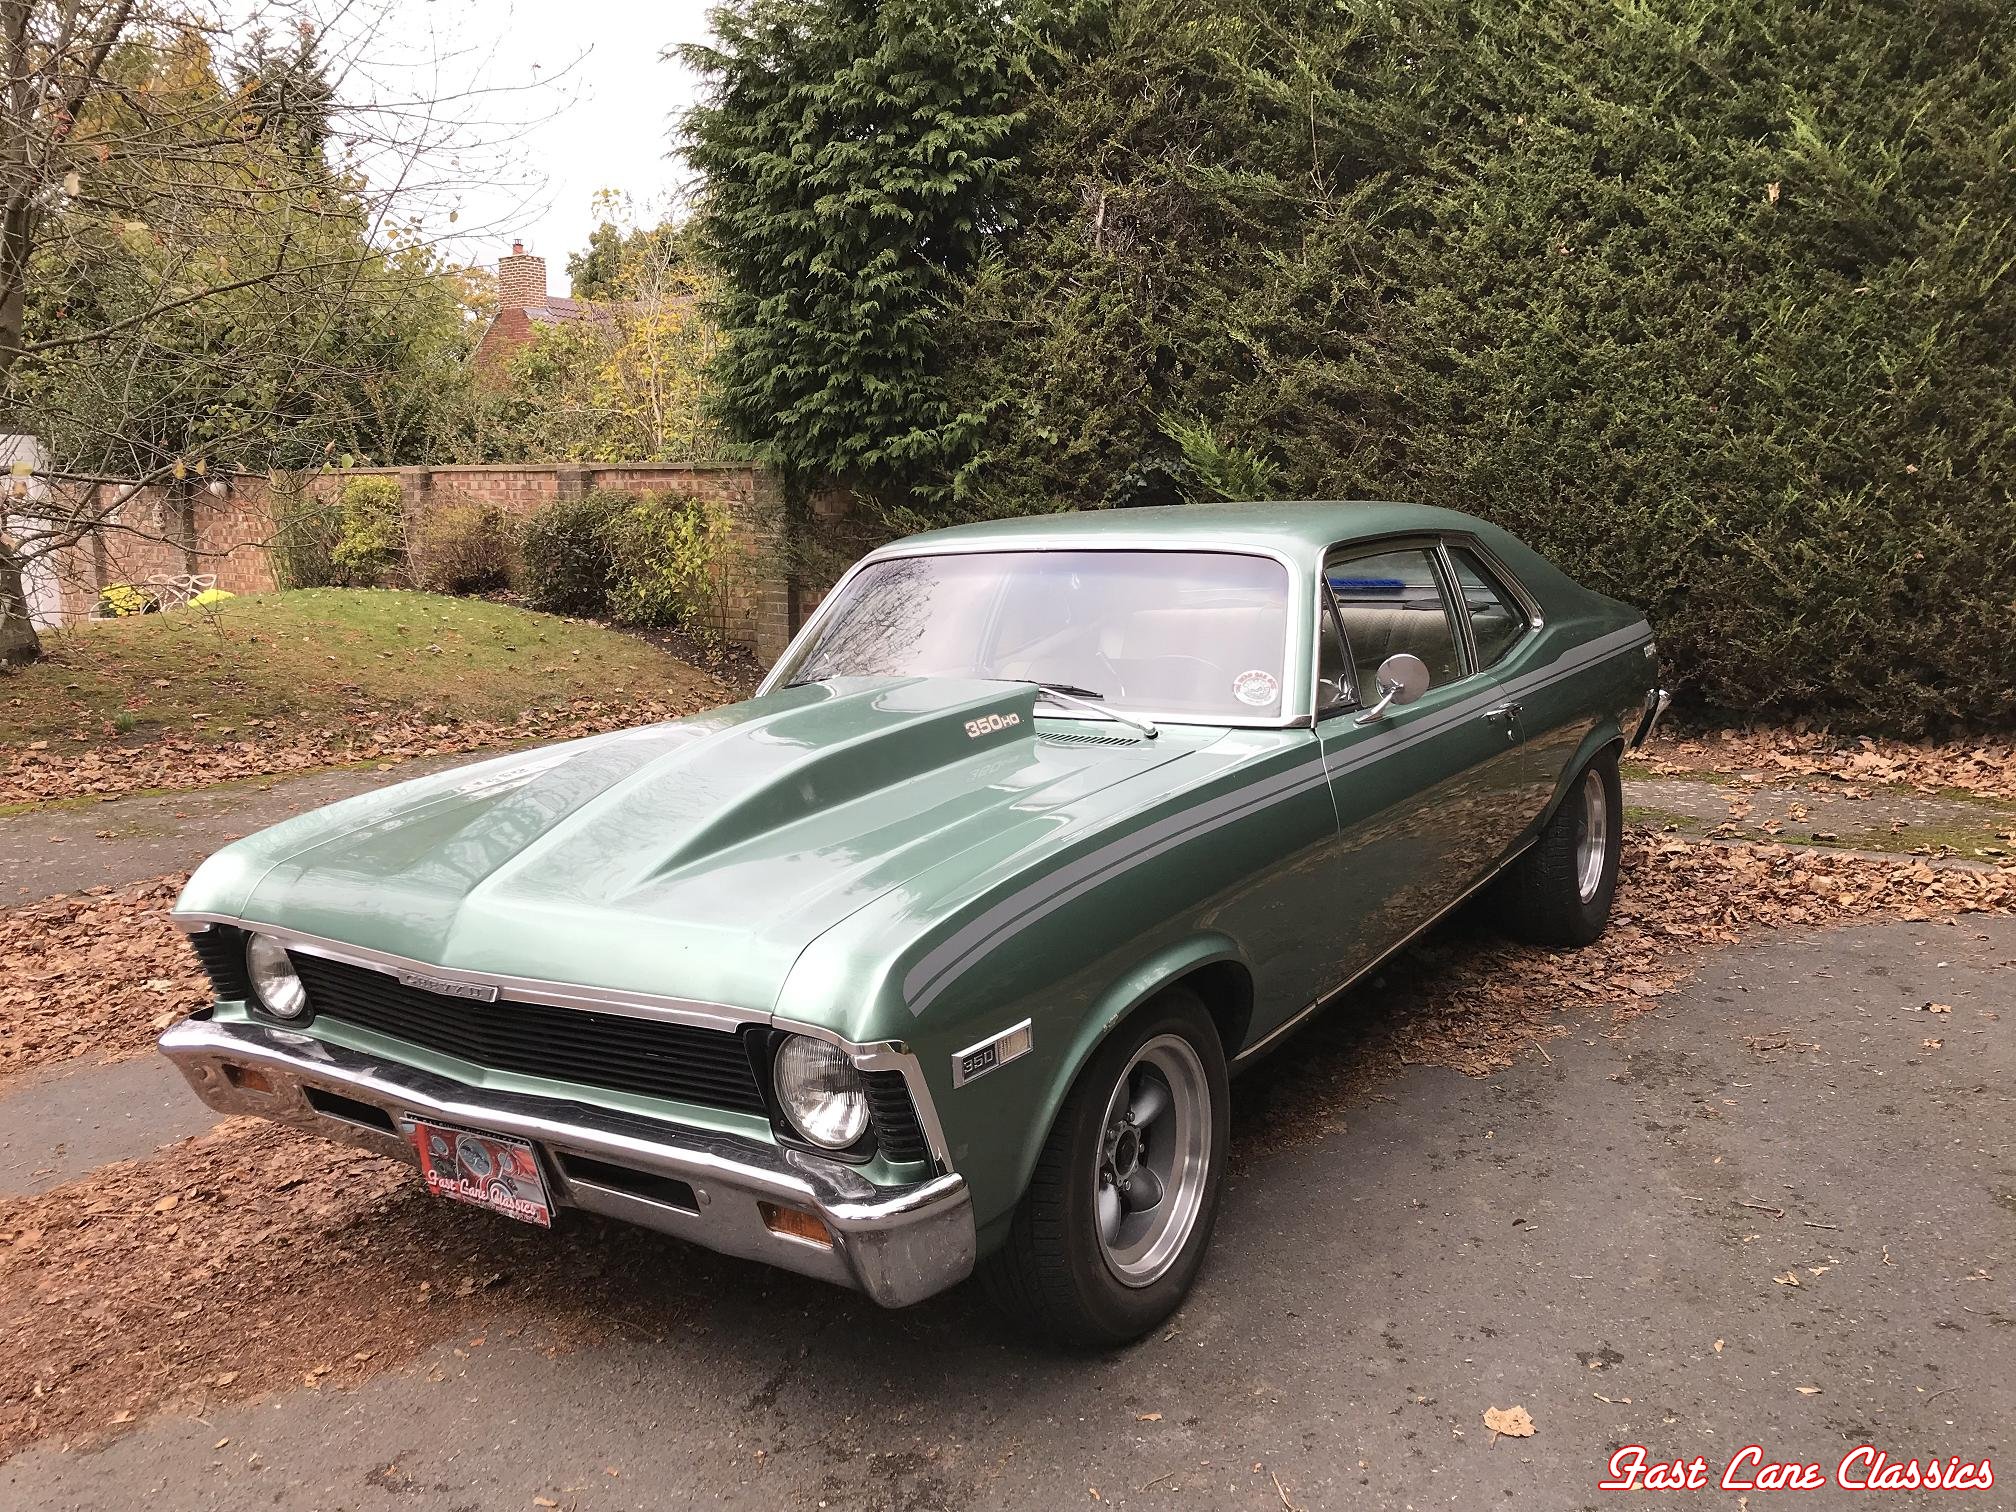 1968 Chevrolet Nova Coupe For Sale By Fast Lane Classics